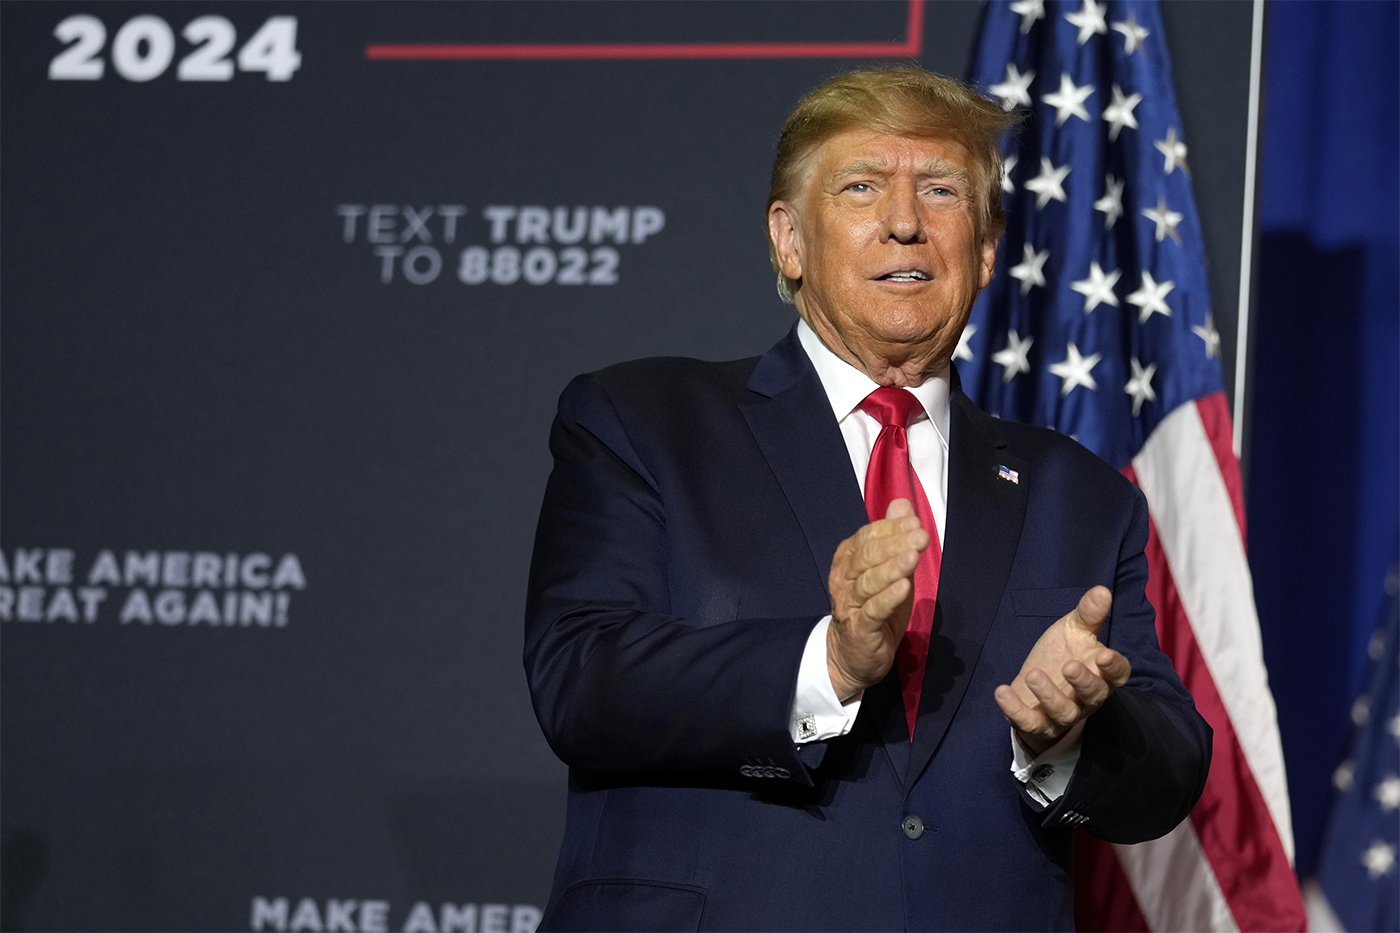 Trump clapping in front of 2024 campaign poster and US flag